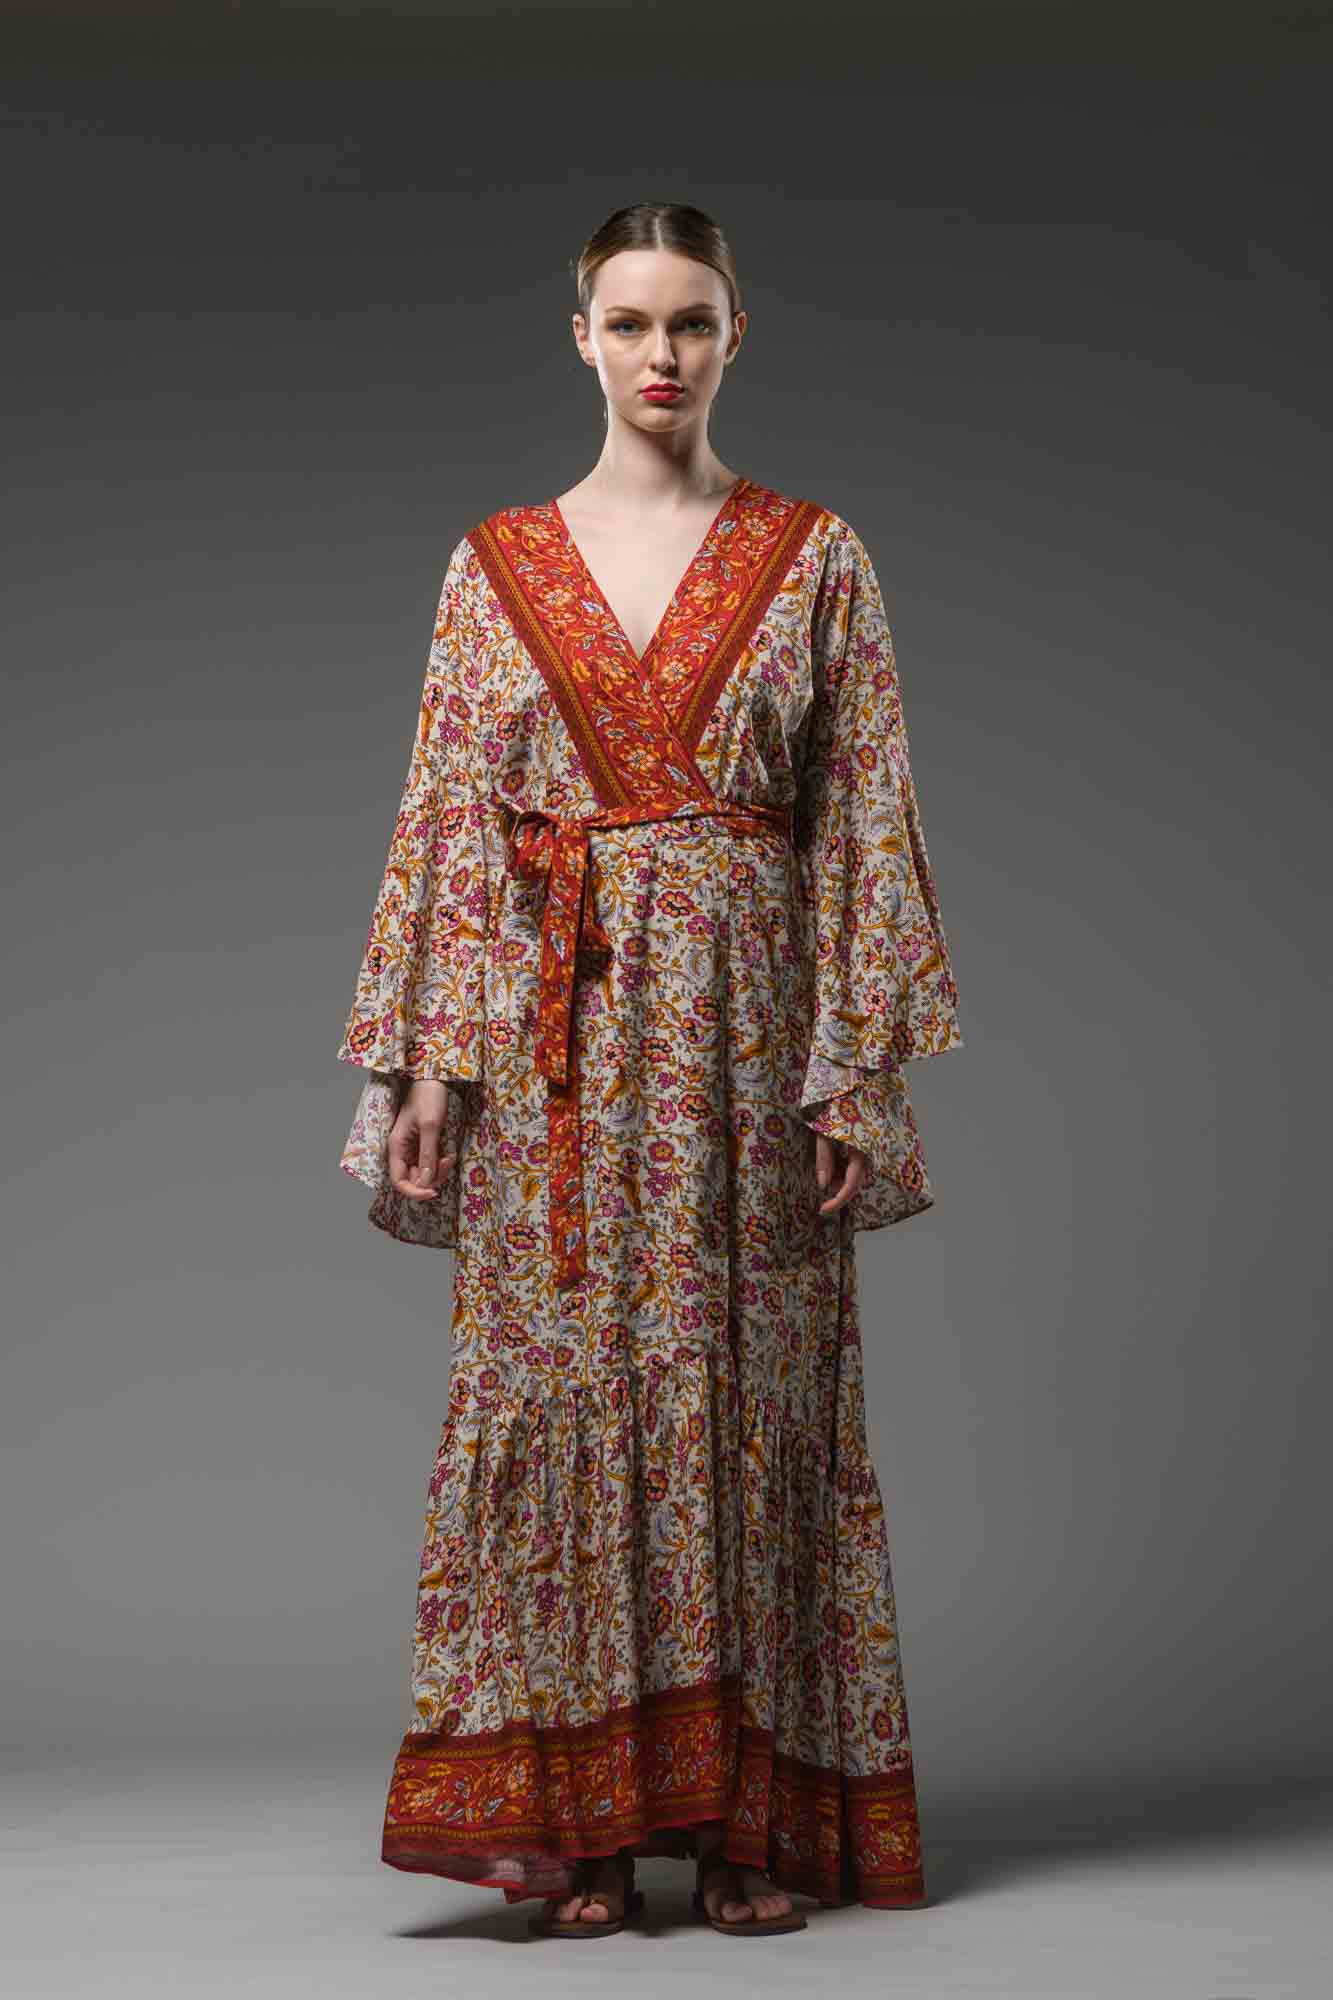 Bohemian style cream red floral border printed V neck ruffled self tie waist bell sleeve maxi wrap dress